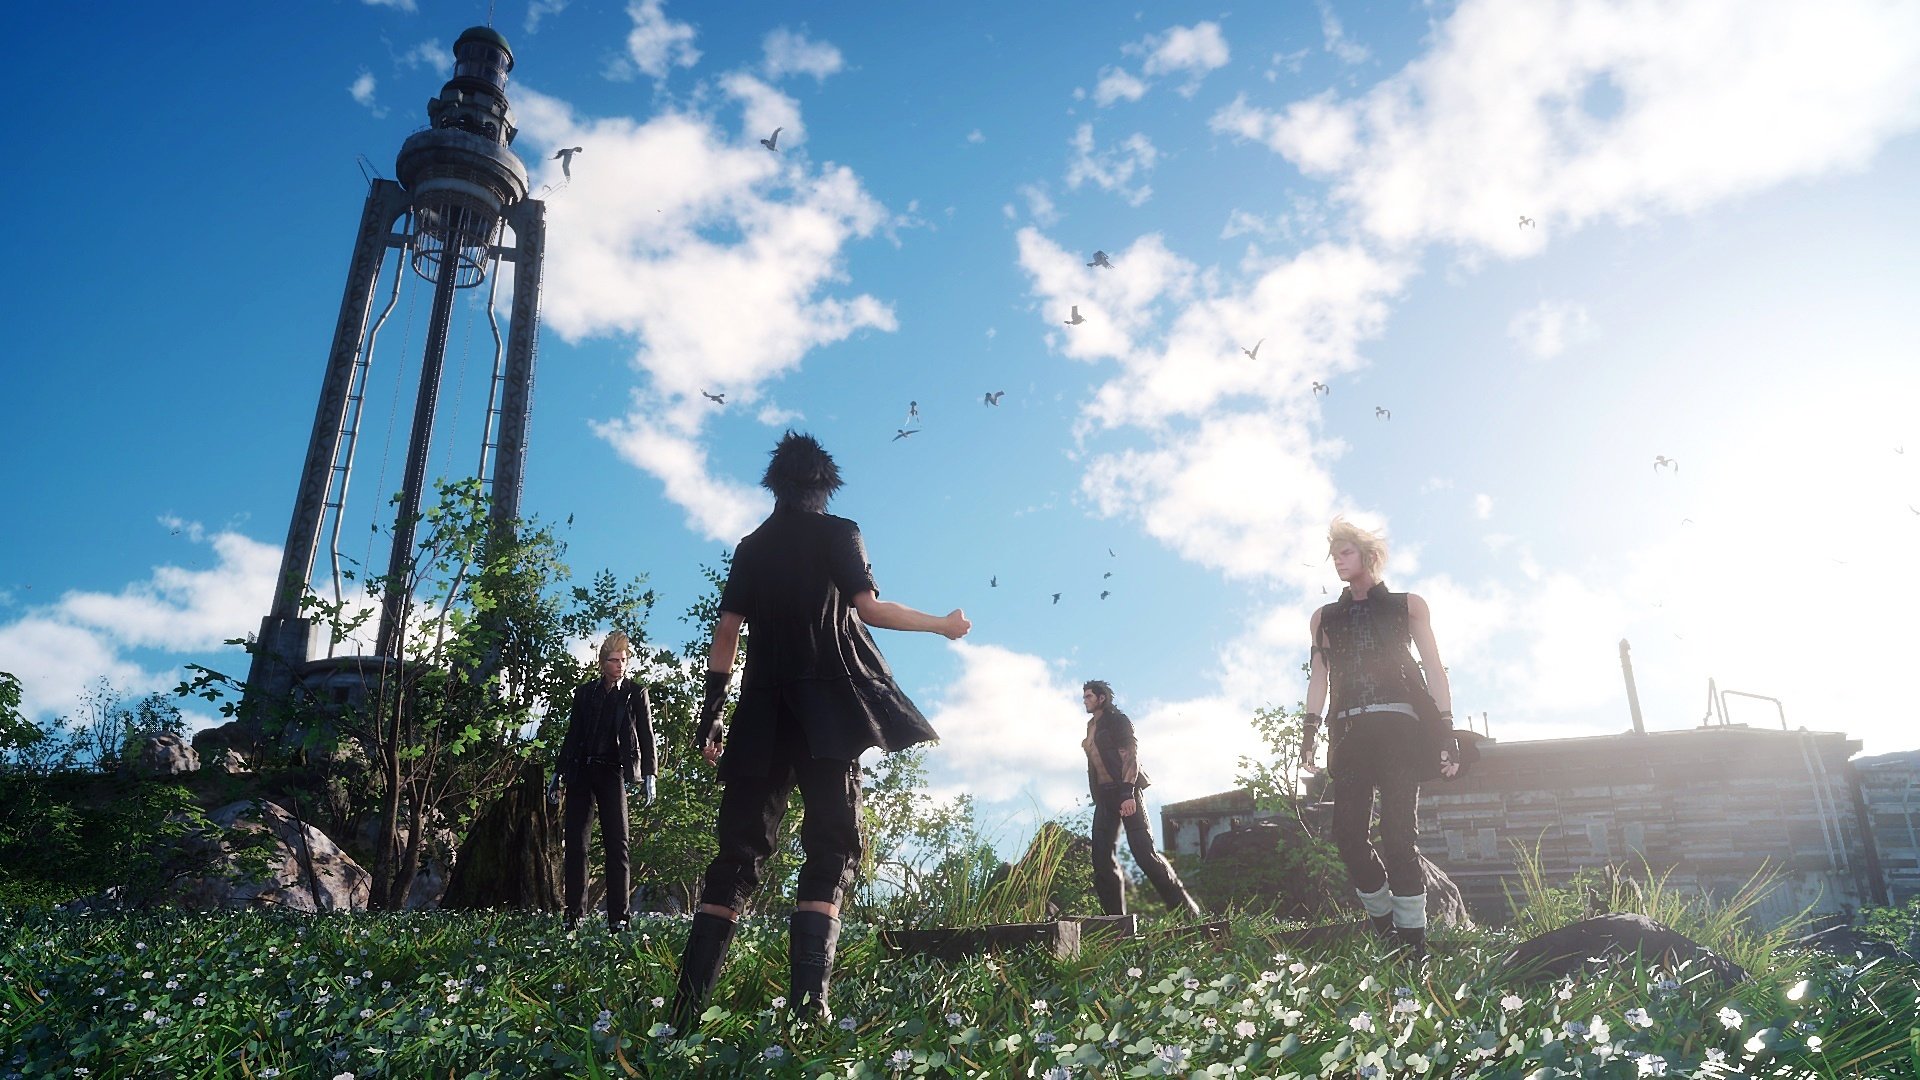 Final Fantasy Xv Hd Wallpaper Background Image 19x1080 Id 7351 Wallpaper Abyss